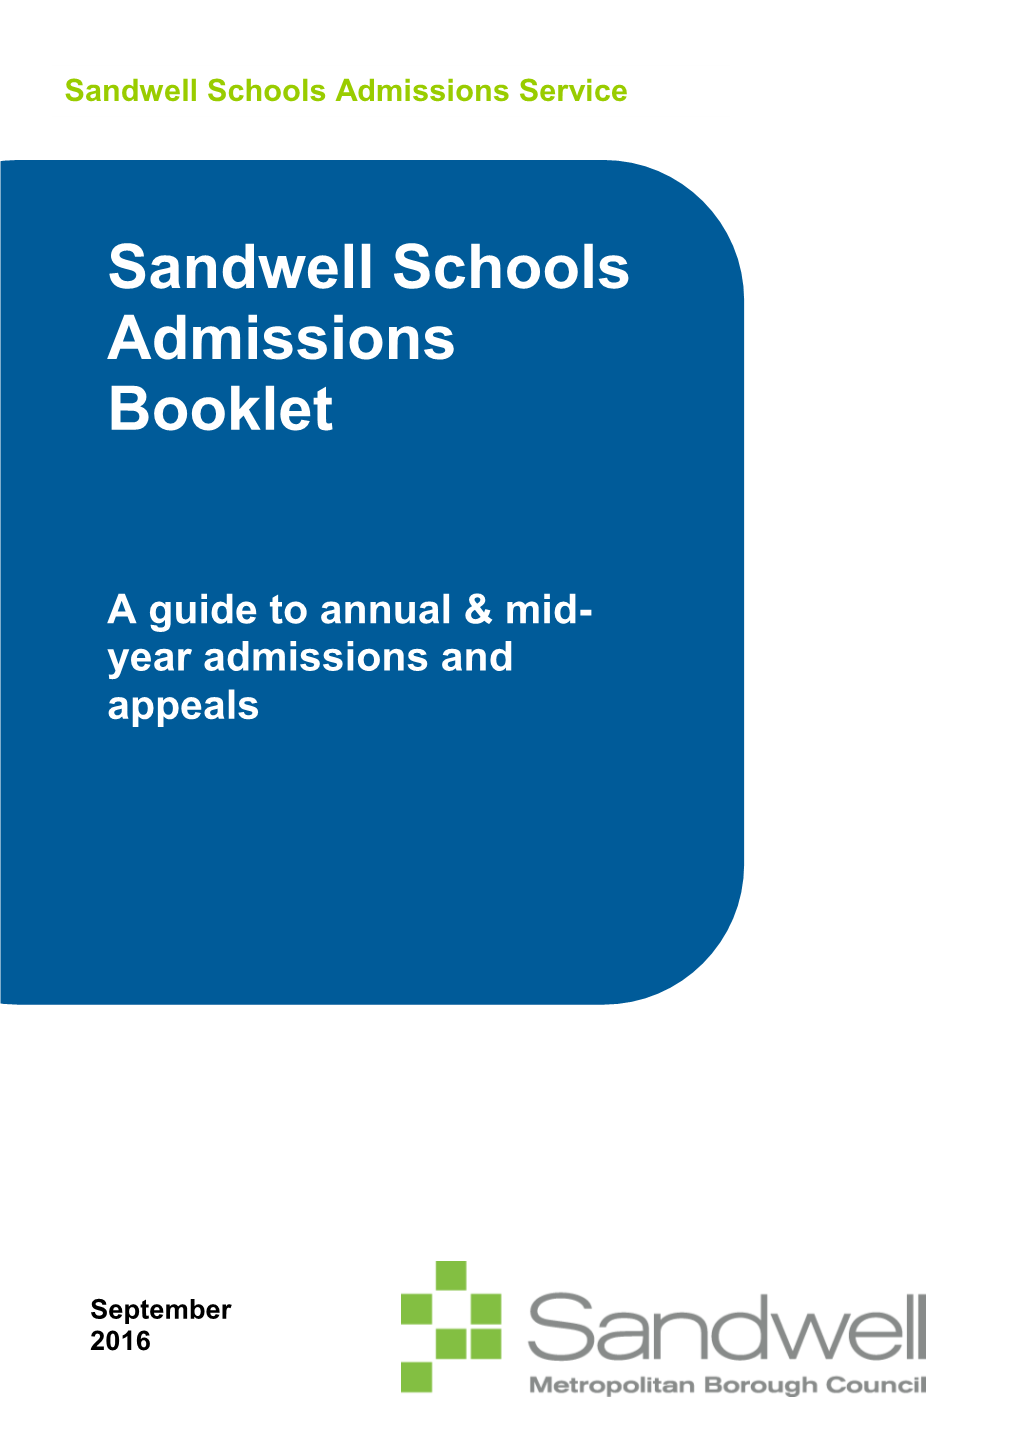 Sandwell Schools Admissions Booklet